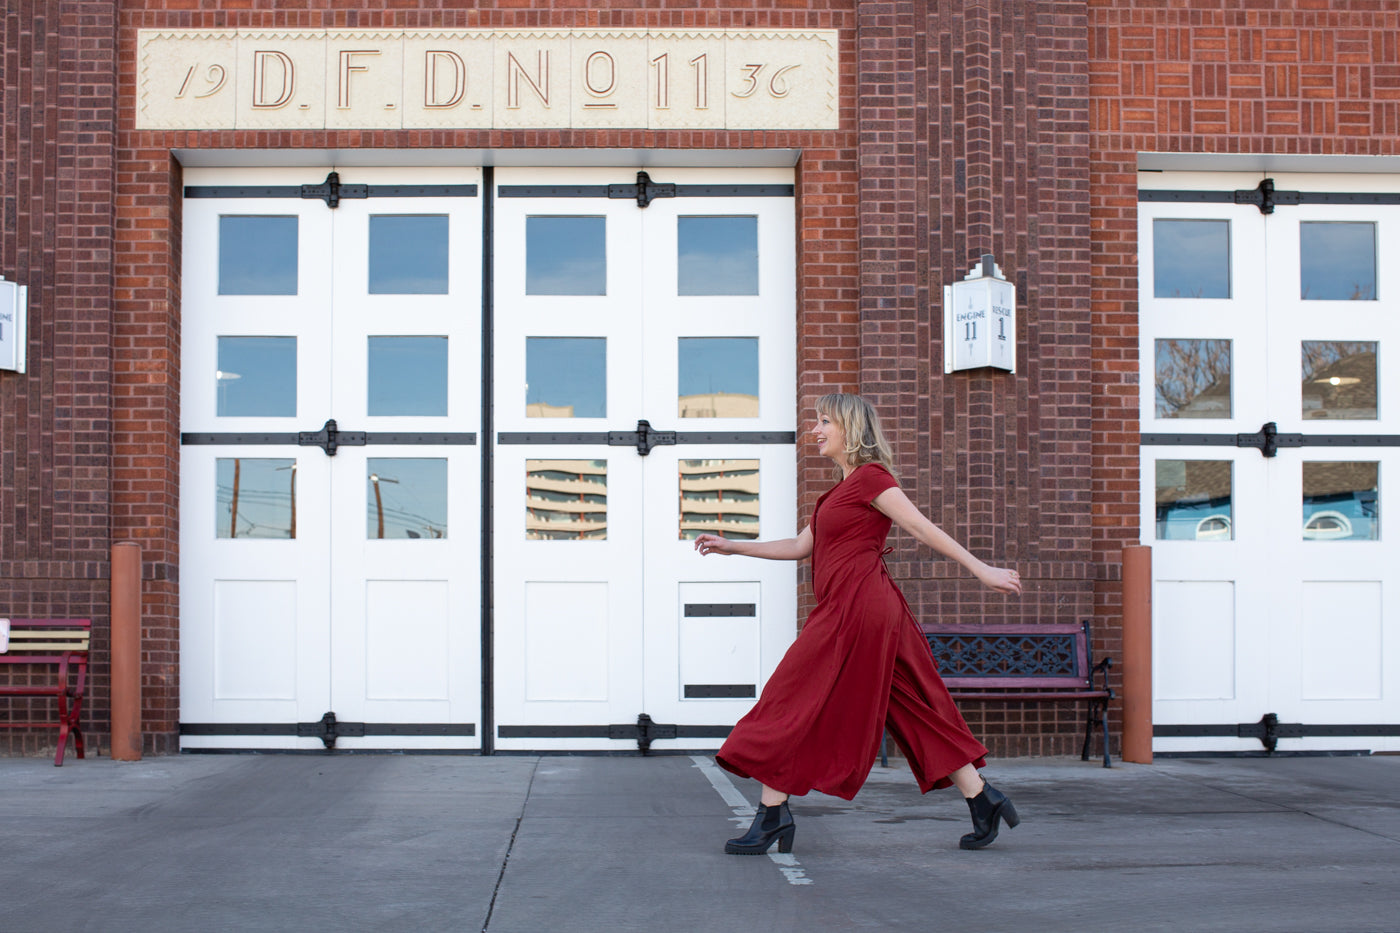 Amber taking large strides in her red silk noil romper in front of a red brick firehouse with large white doors.